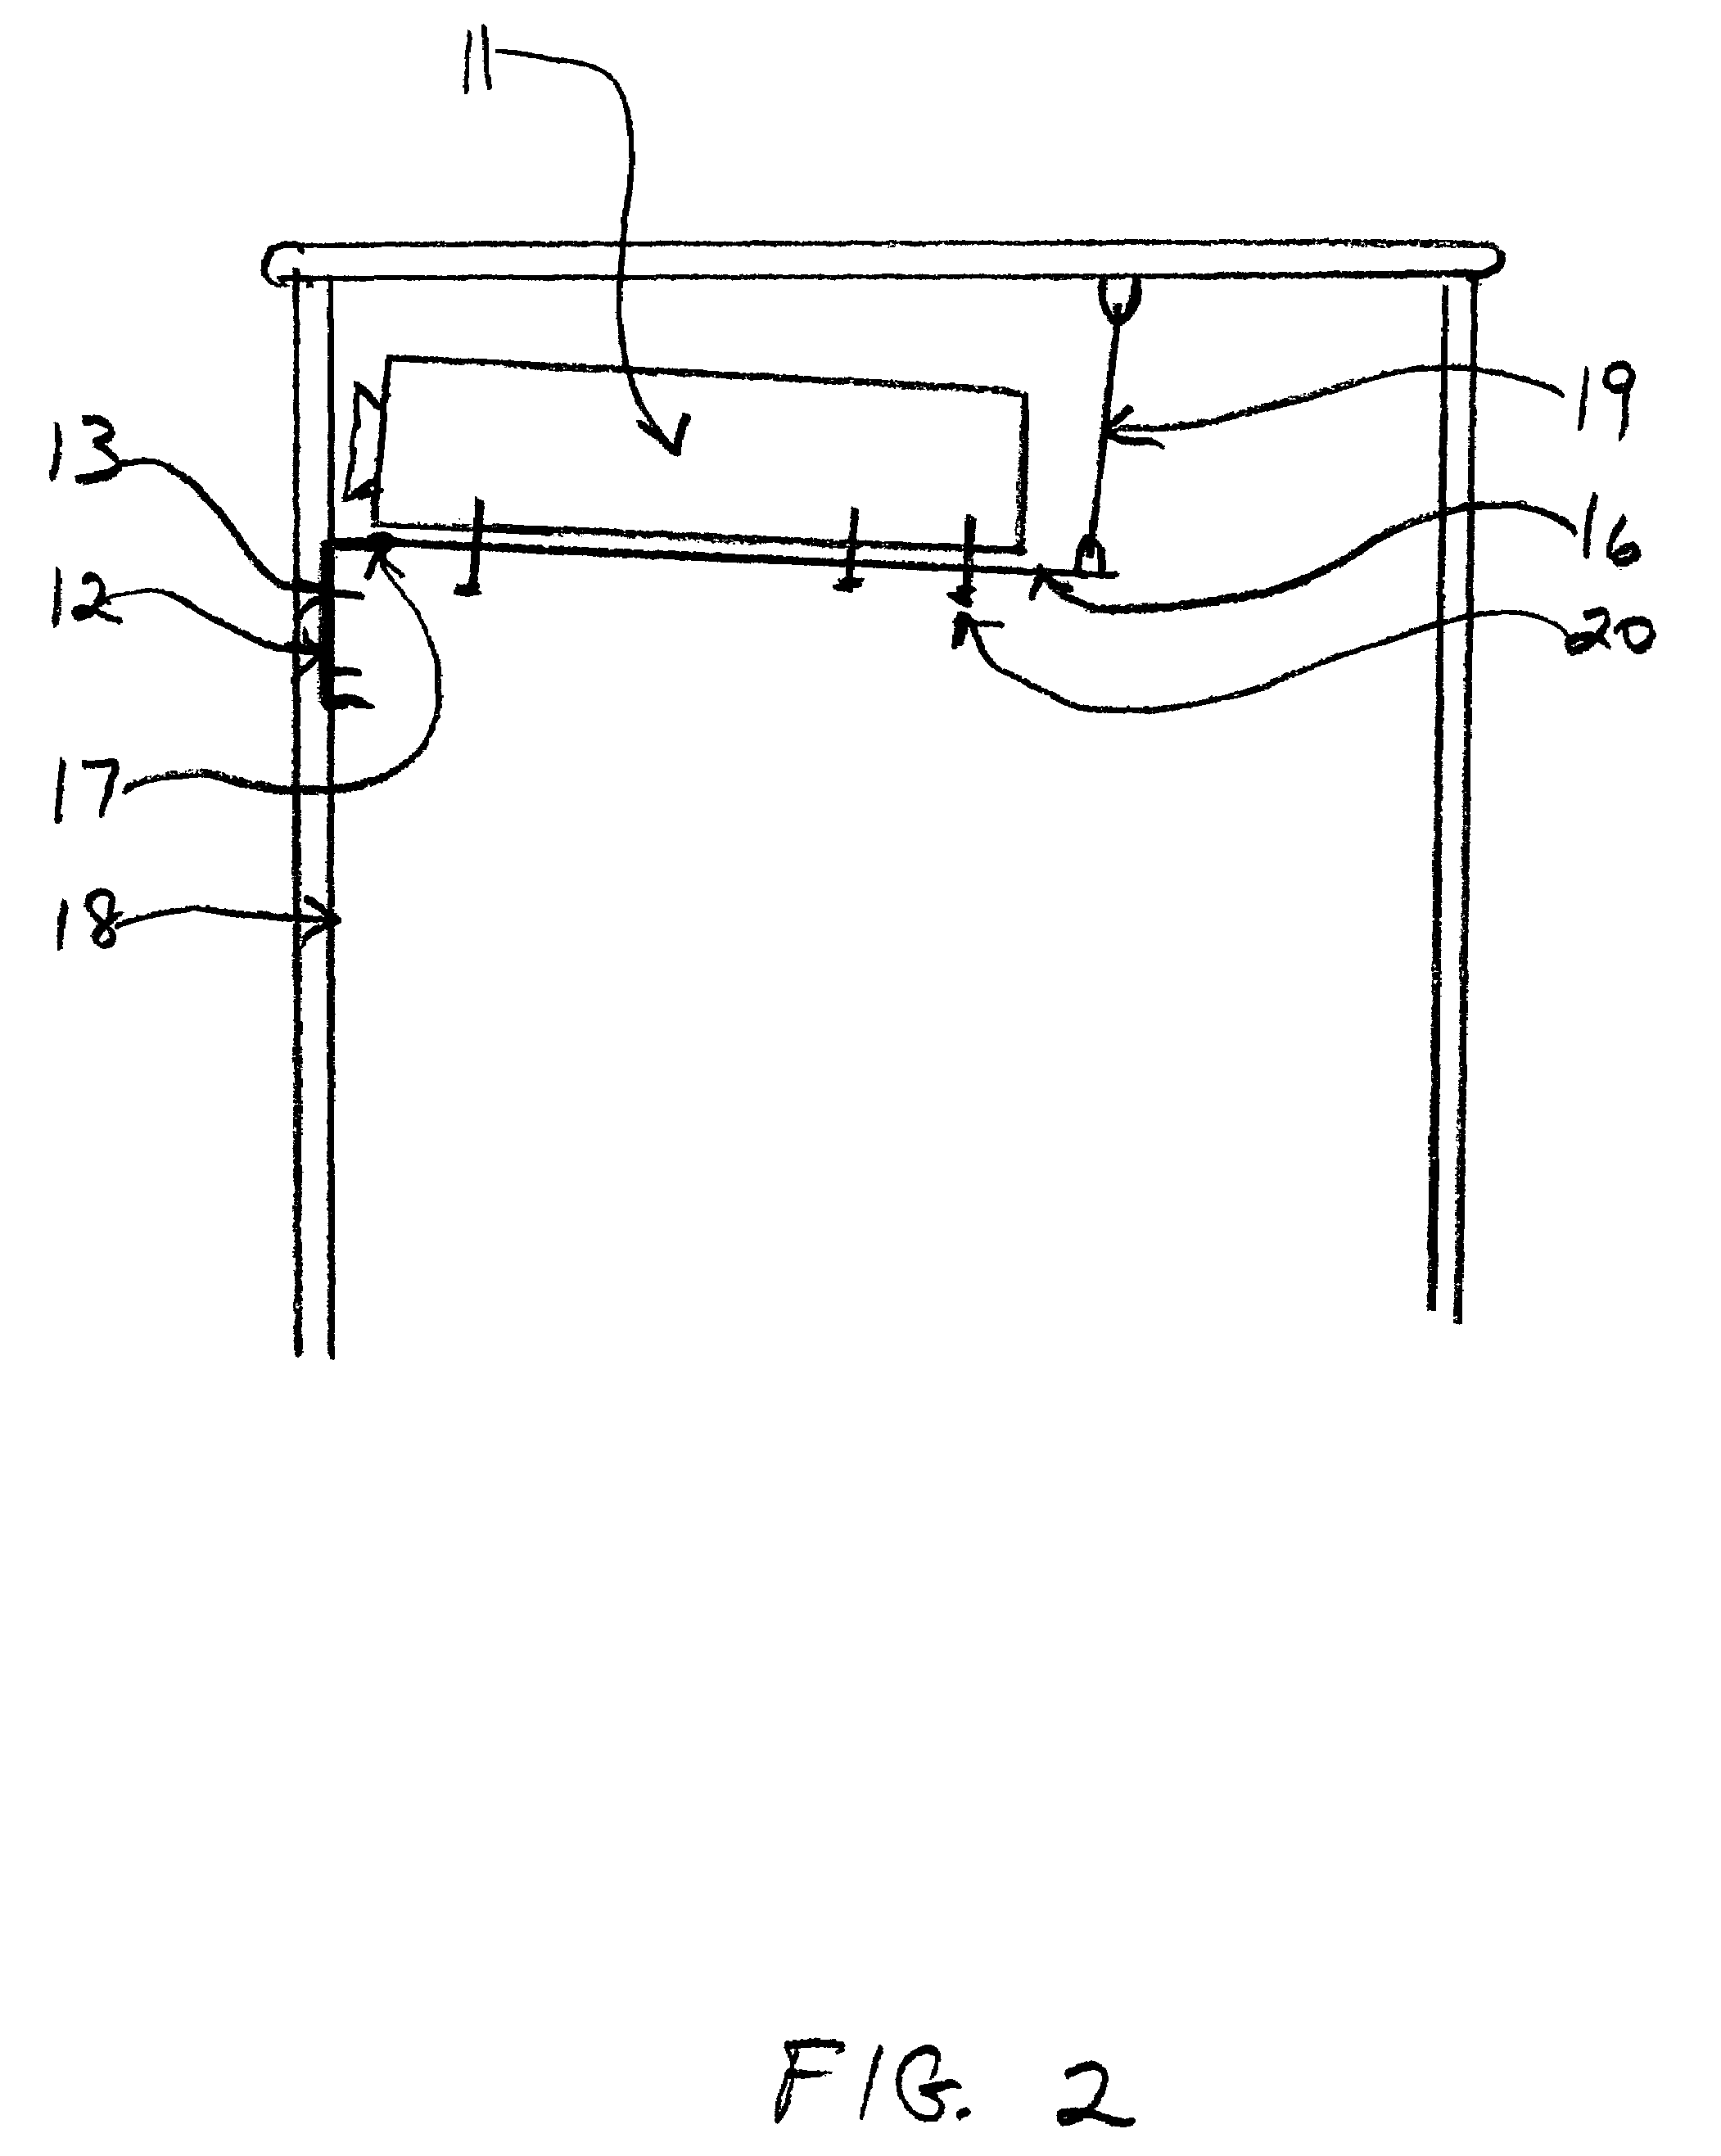 Apparatus for mounting a data/video projector in a portable enclosure